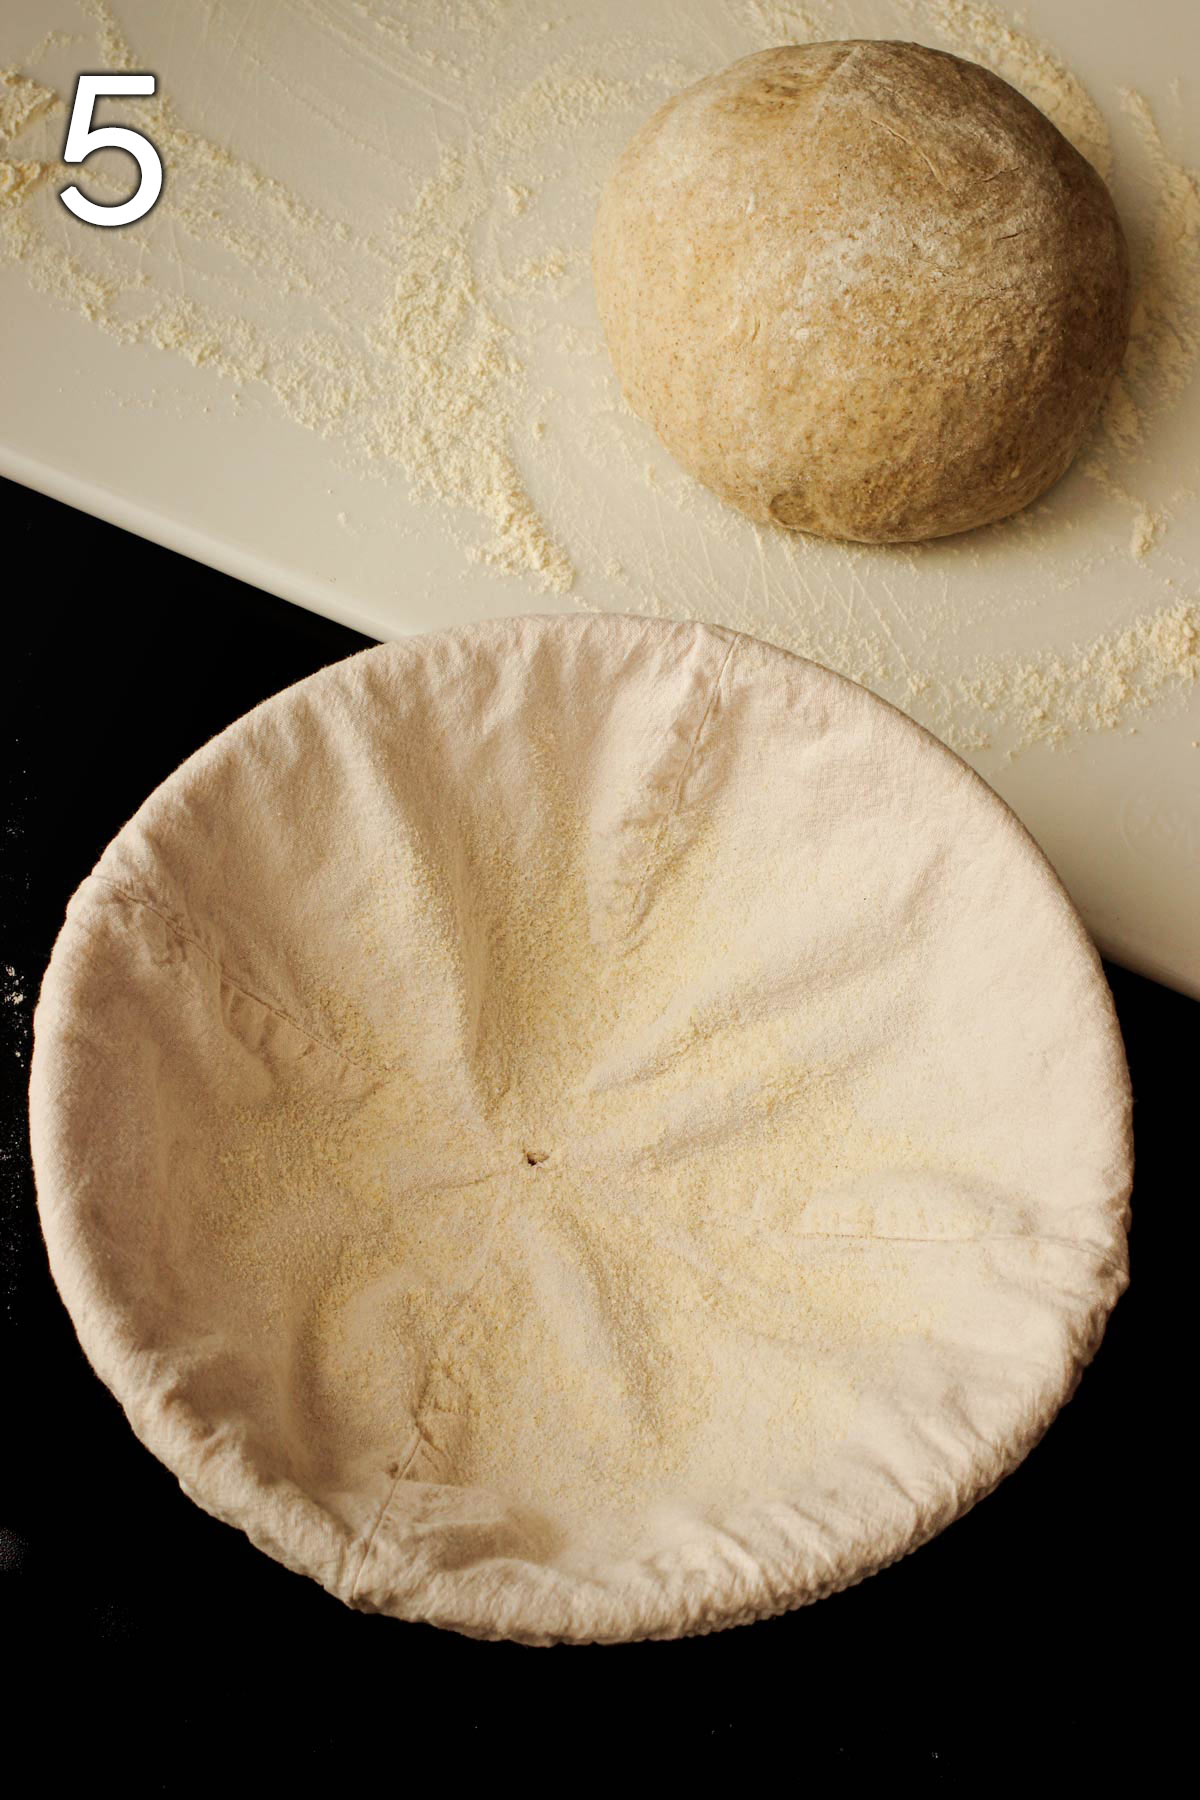 cloth covered banneton dusted with rice flour next to dough ball on floured work surface.